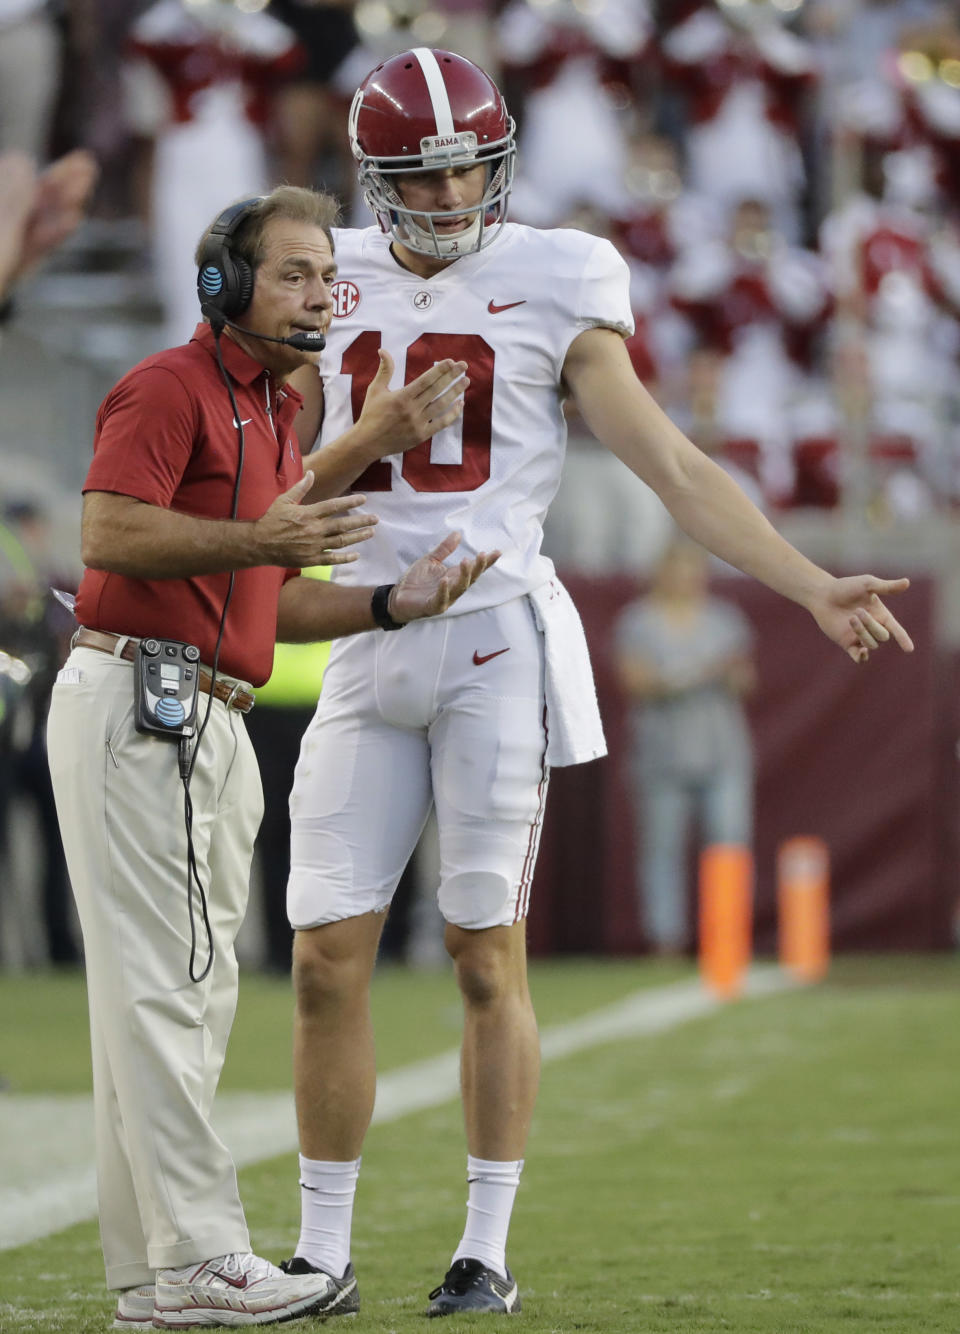 Alabama coach Nick Saban, left, talks with punter JK Scott during the first quarter of an NCAA college football game Saturday, Oct. 7, 2017, in College Station, Texas. (AP Photo/David J. Phillip)